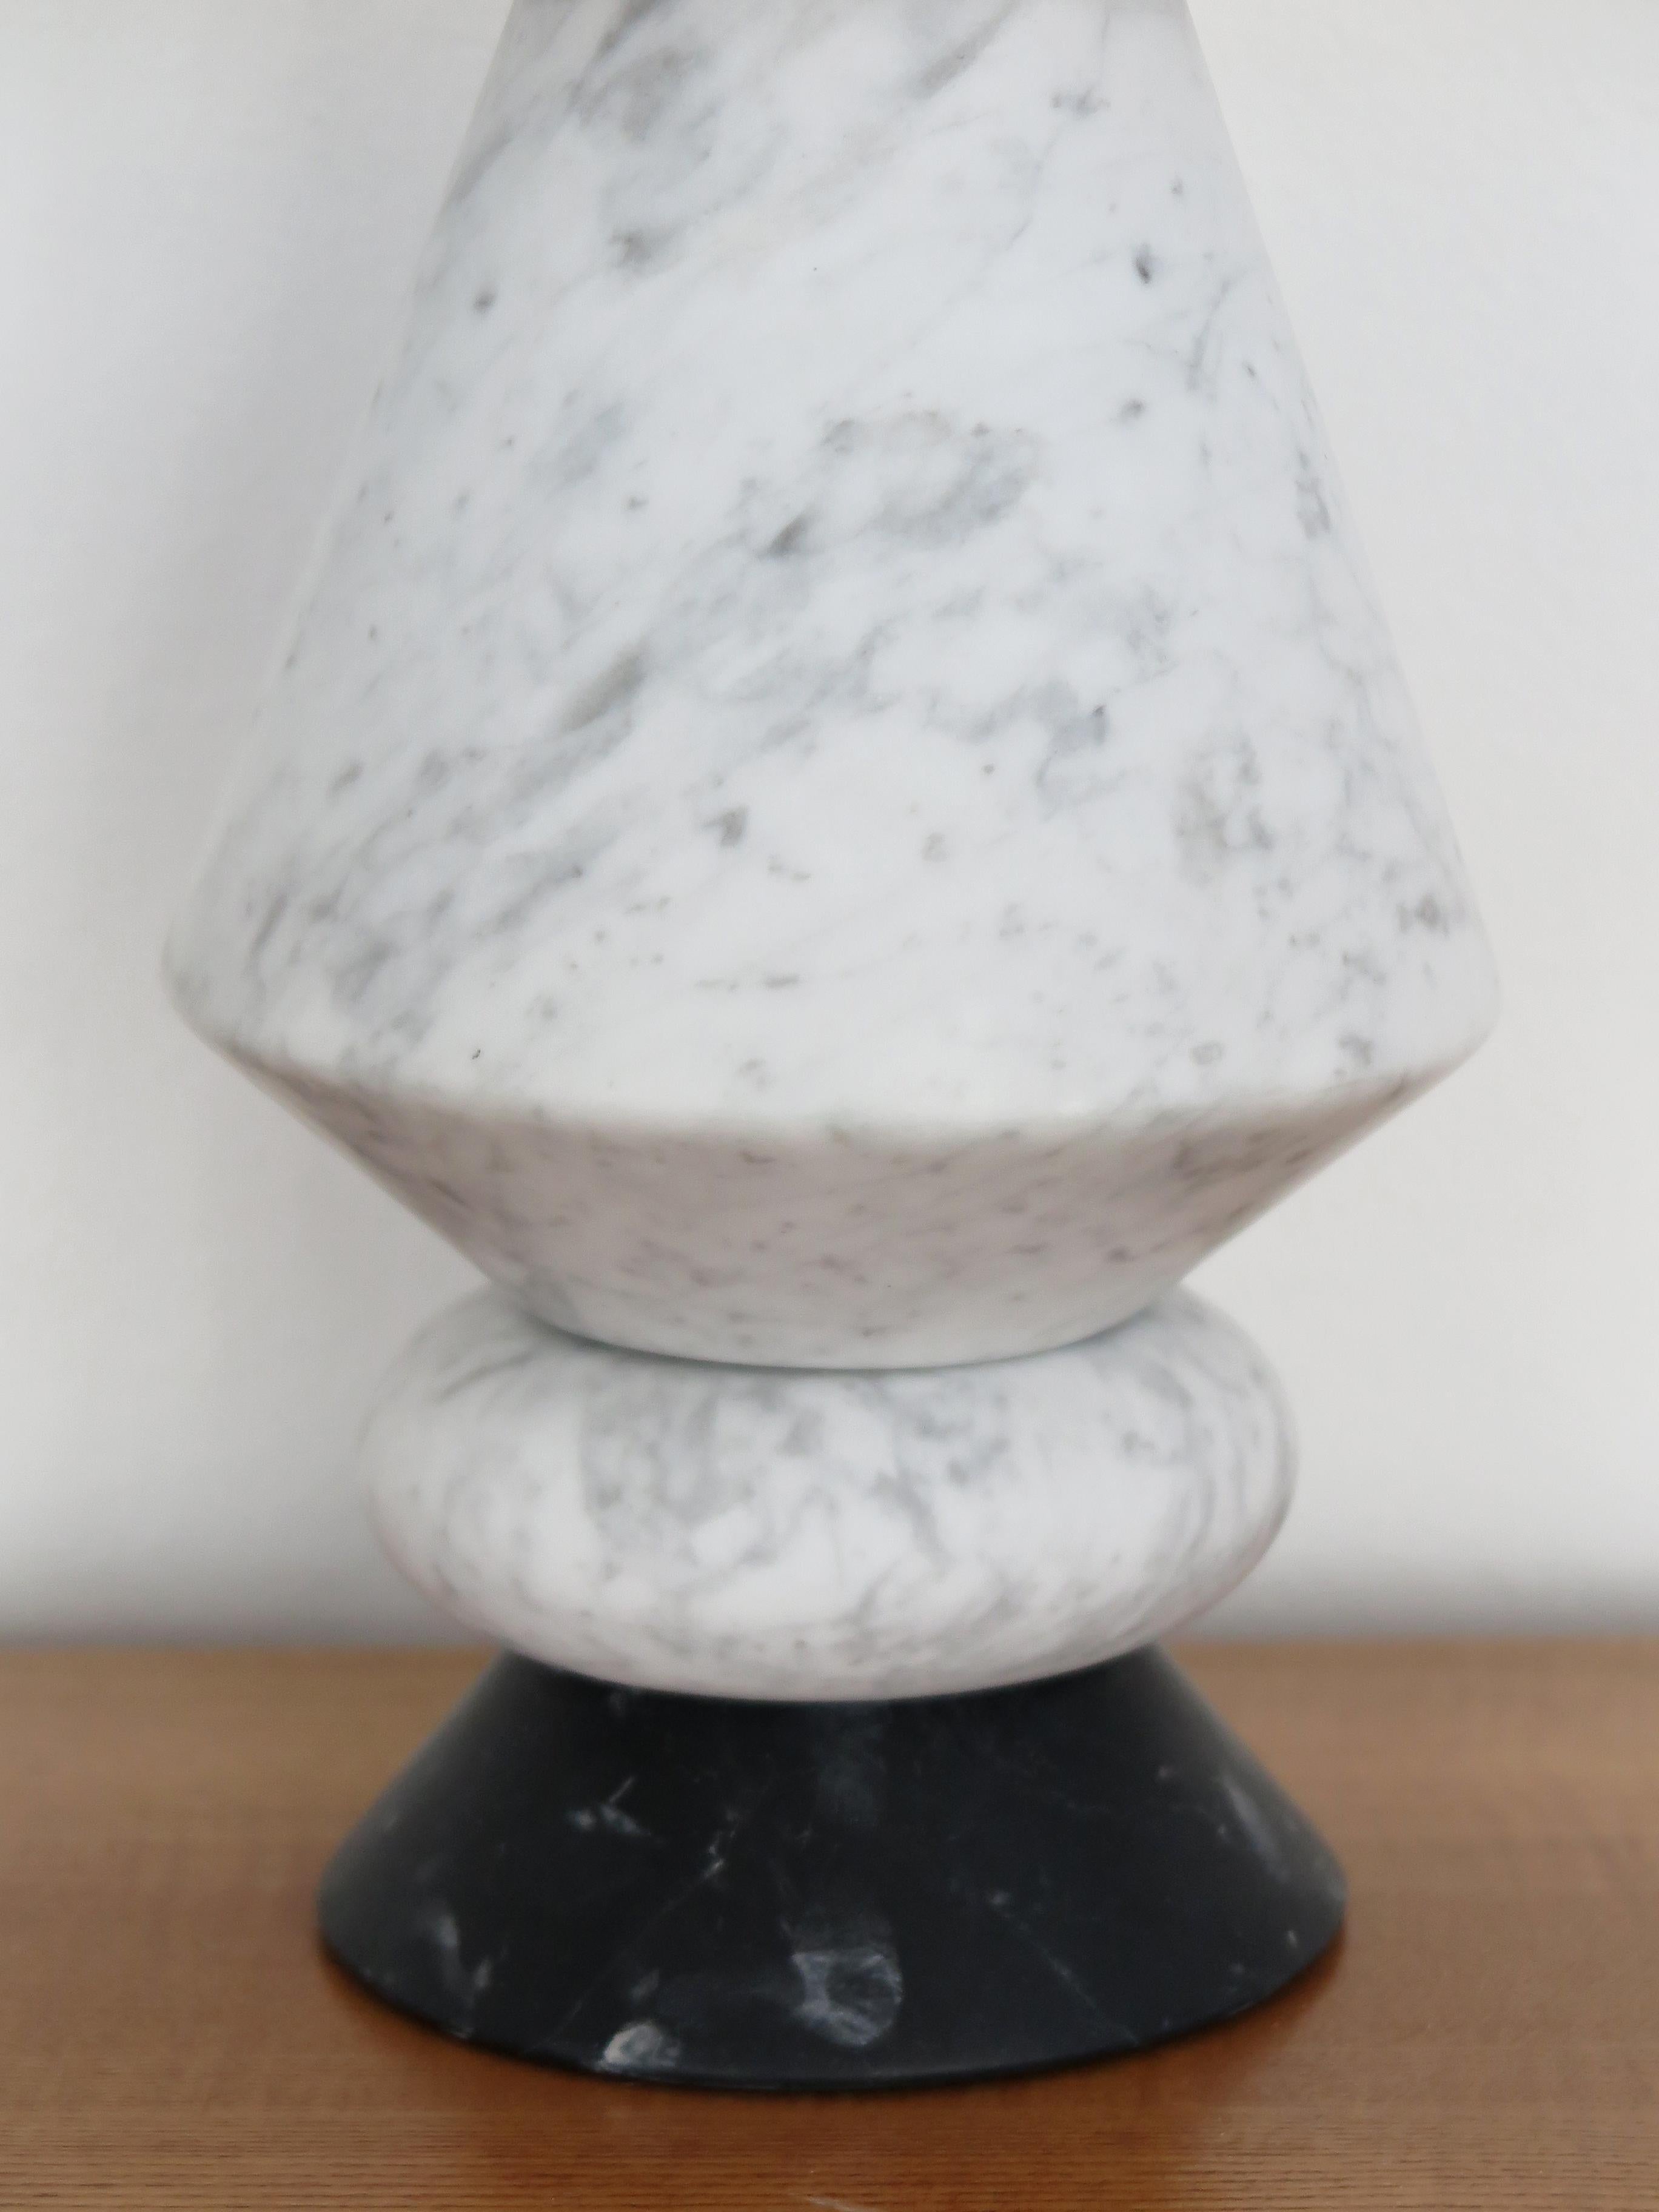 Italian Marble and Wood Contemporary Sculpture, Flower Vase 